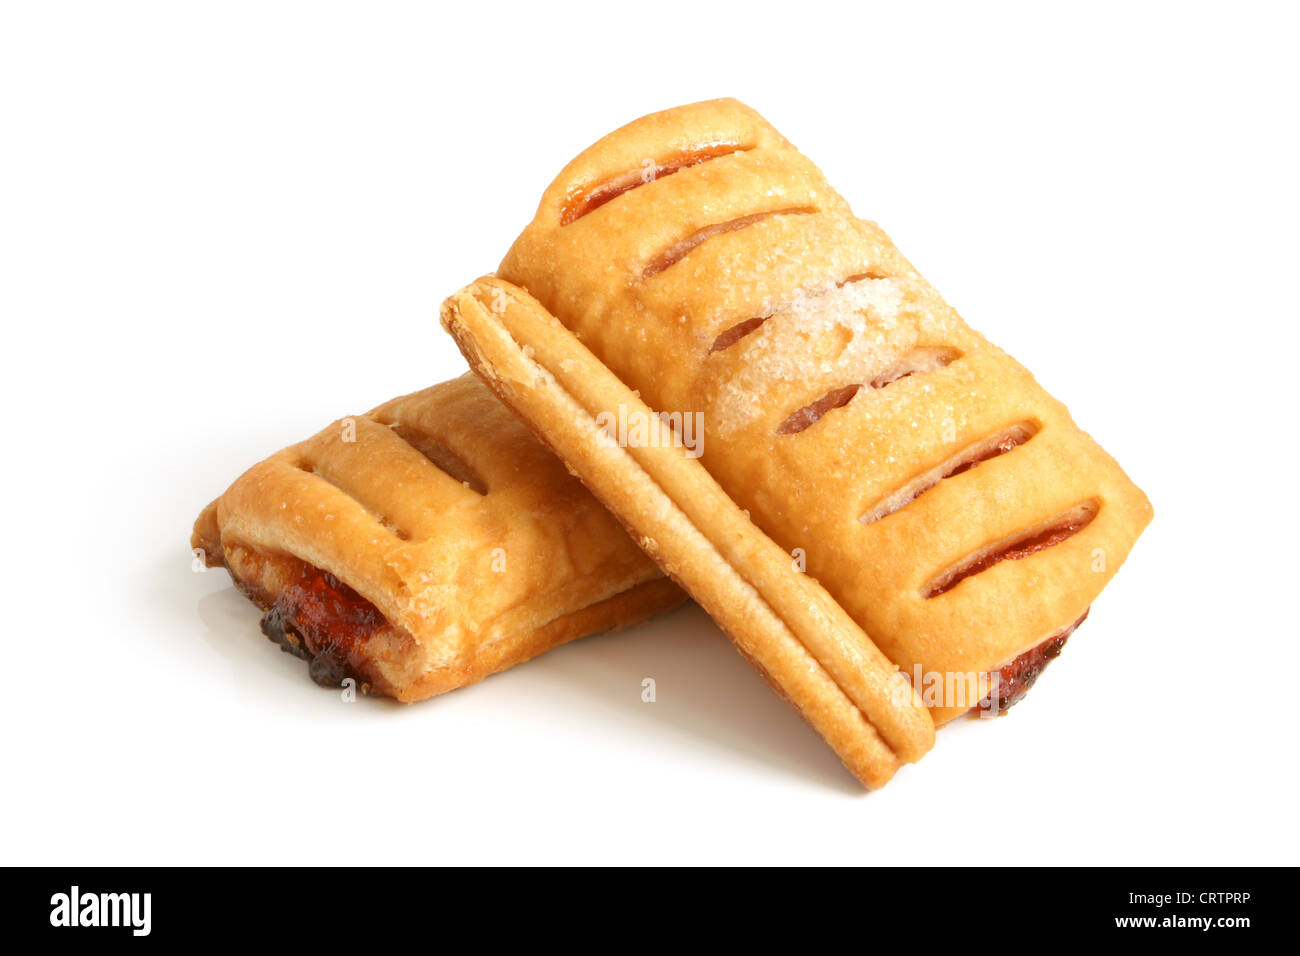 Puff pastry with jam Stock Photo